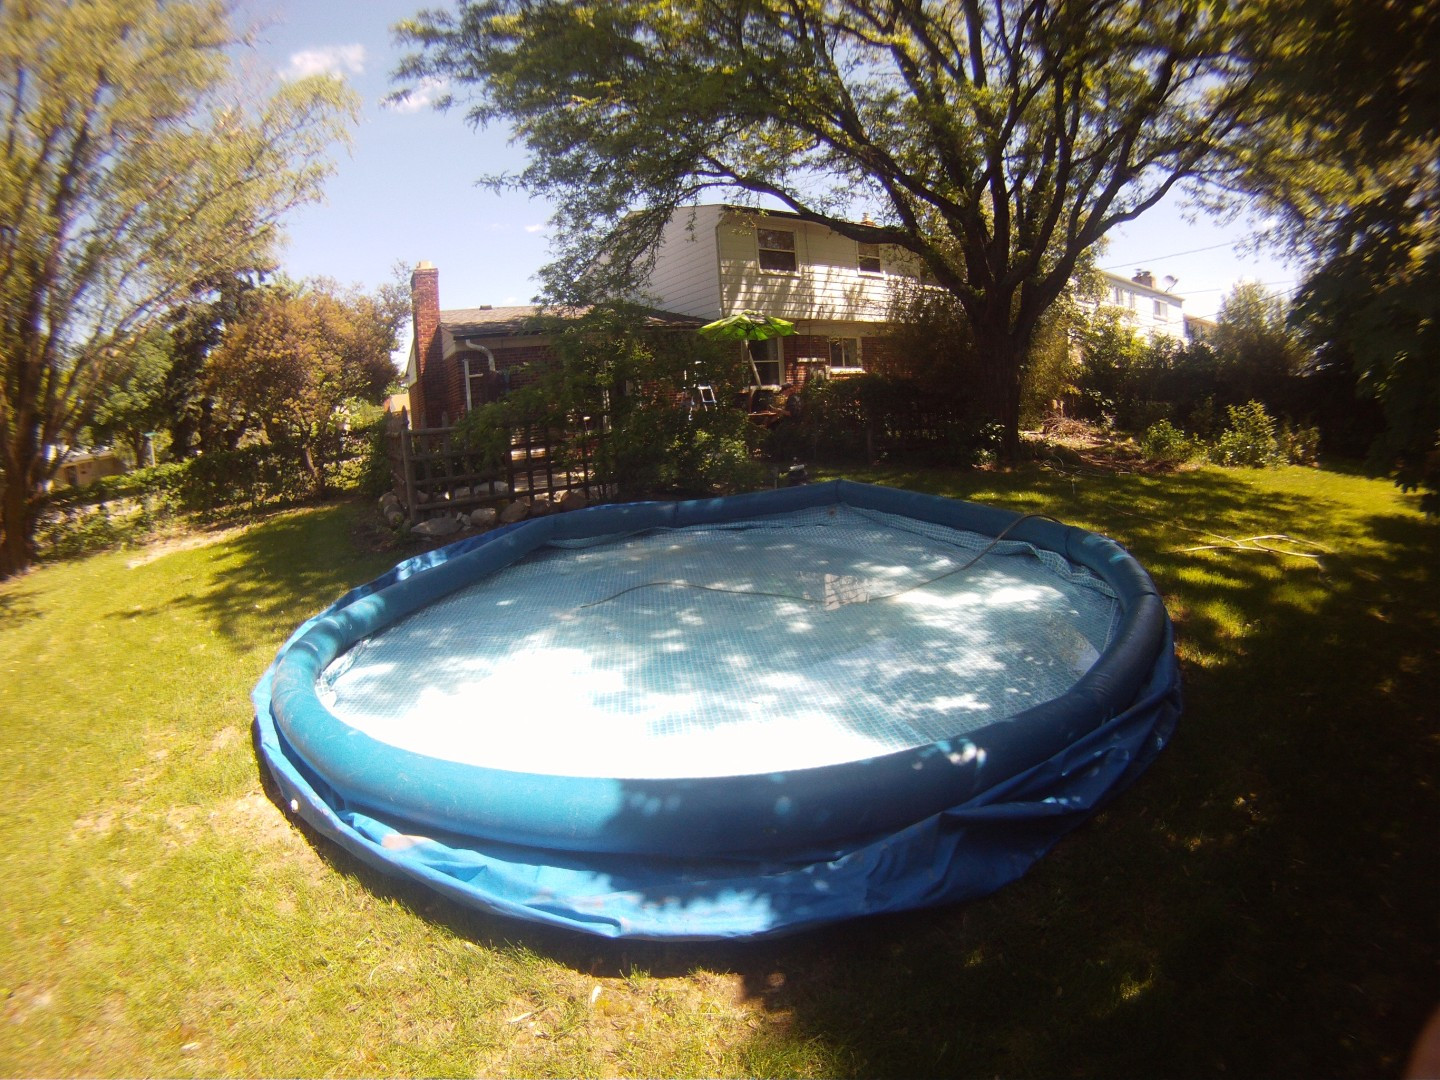 4 Ft Above Ground Pool
 New Used Pool